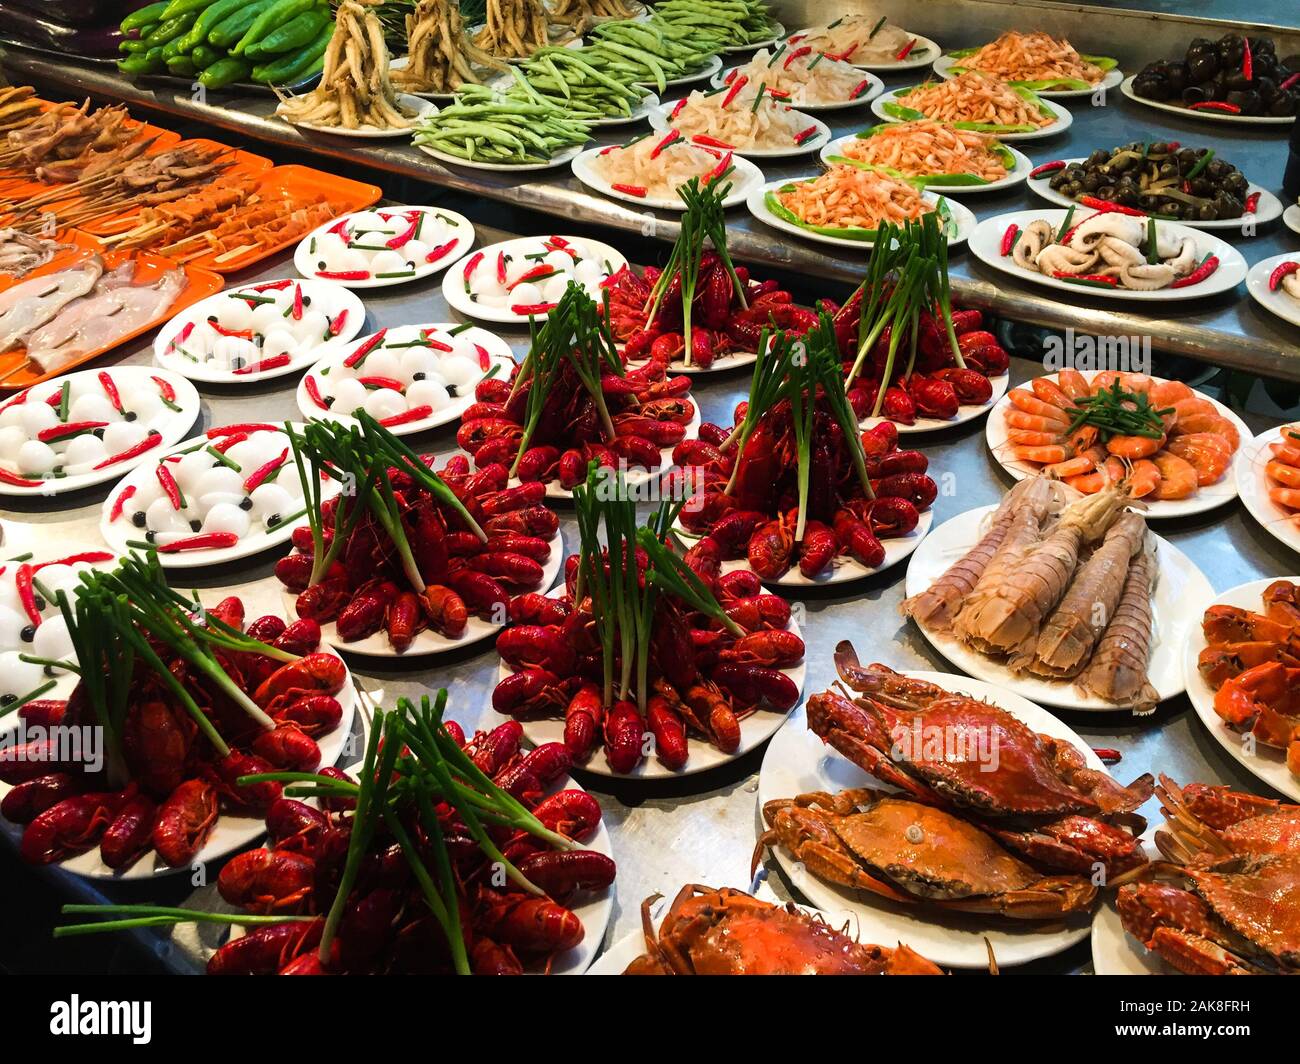 Seafood at Shilin Night Market in Taipei, Taiwan. Shilin is one of the most famous and largest night markets in Taiwan. Stock Photo